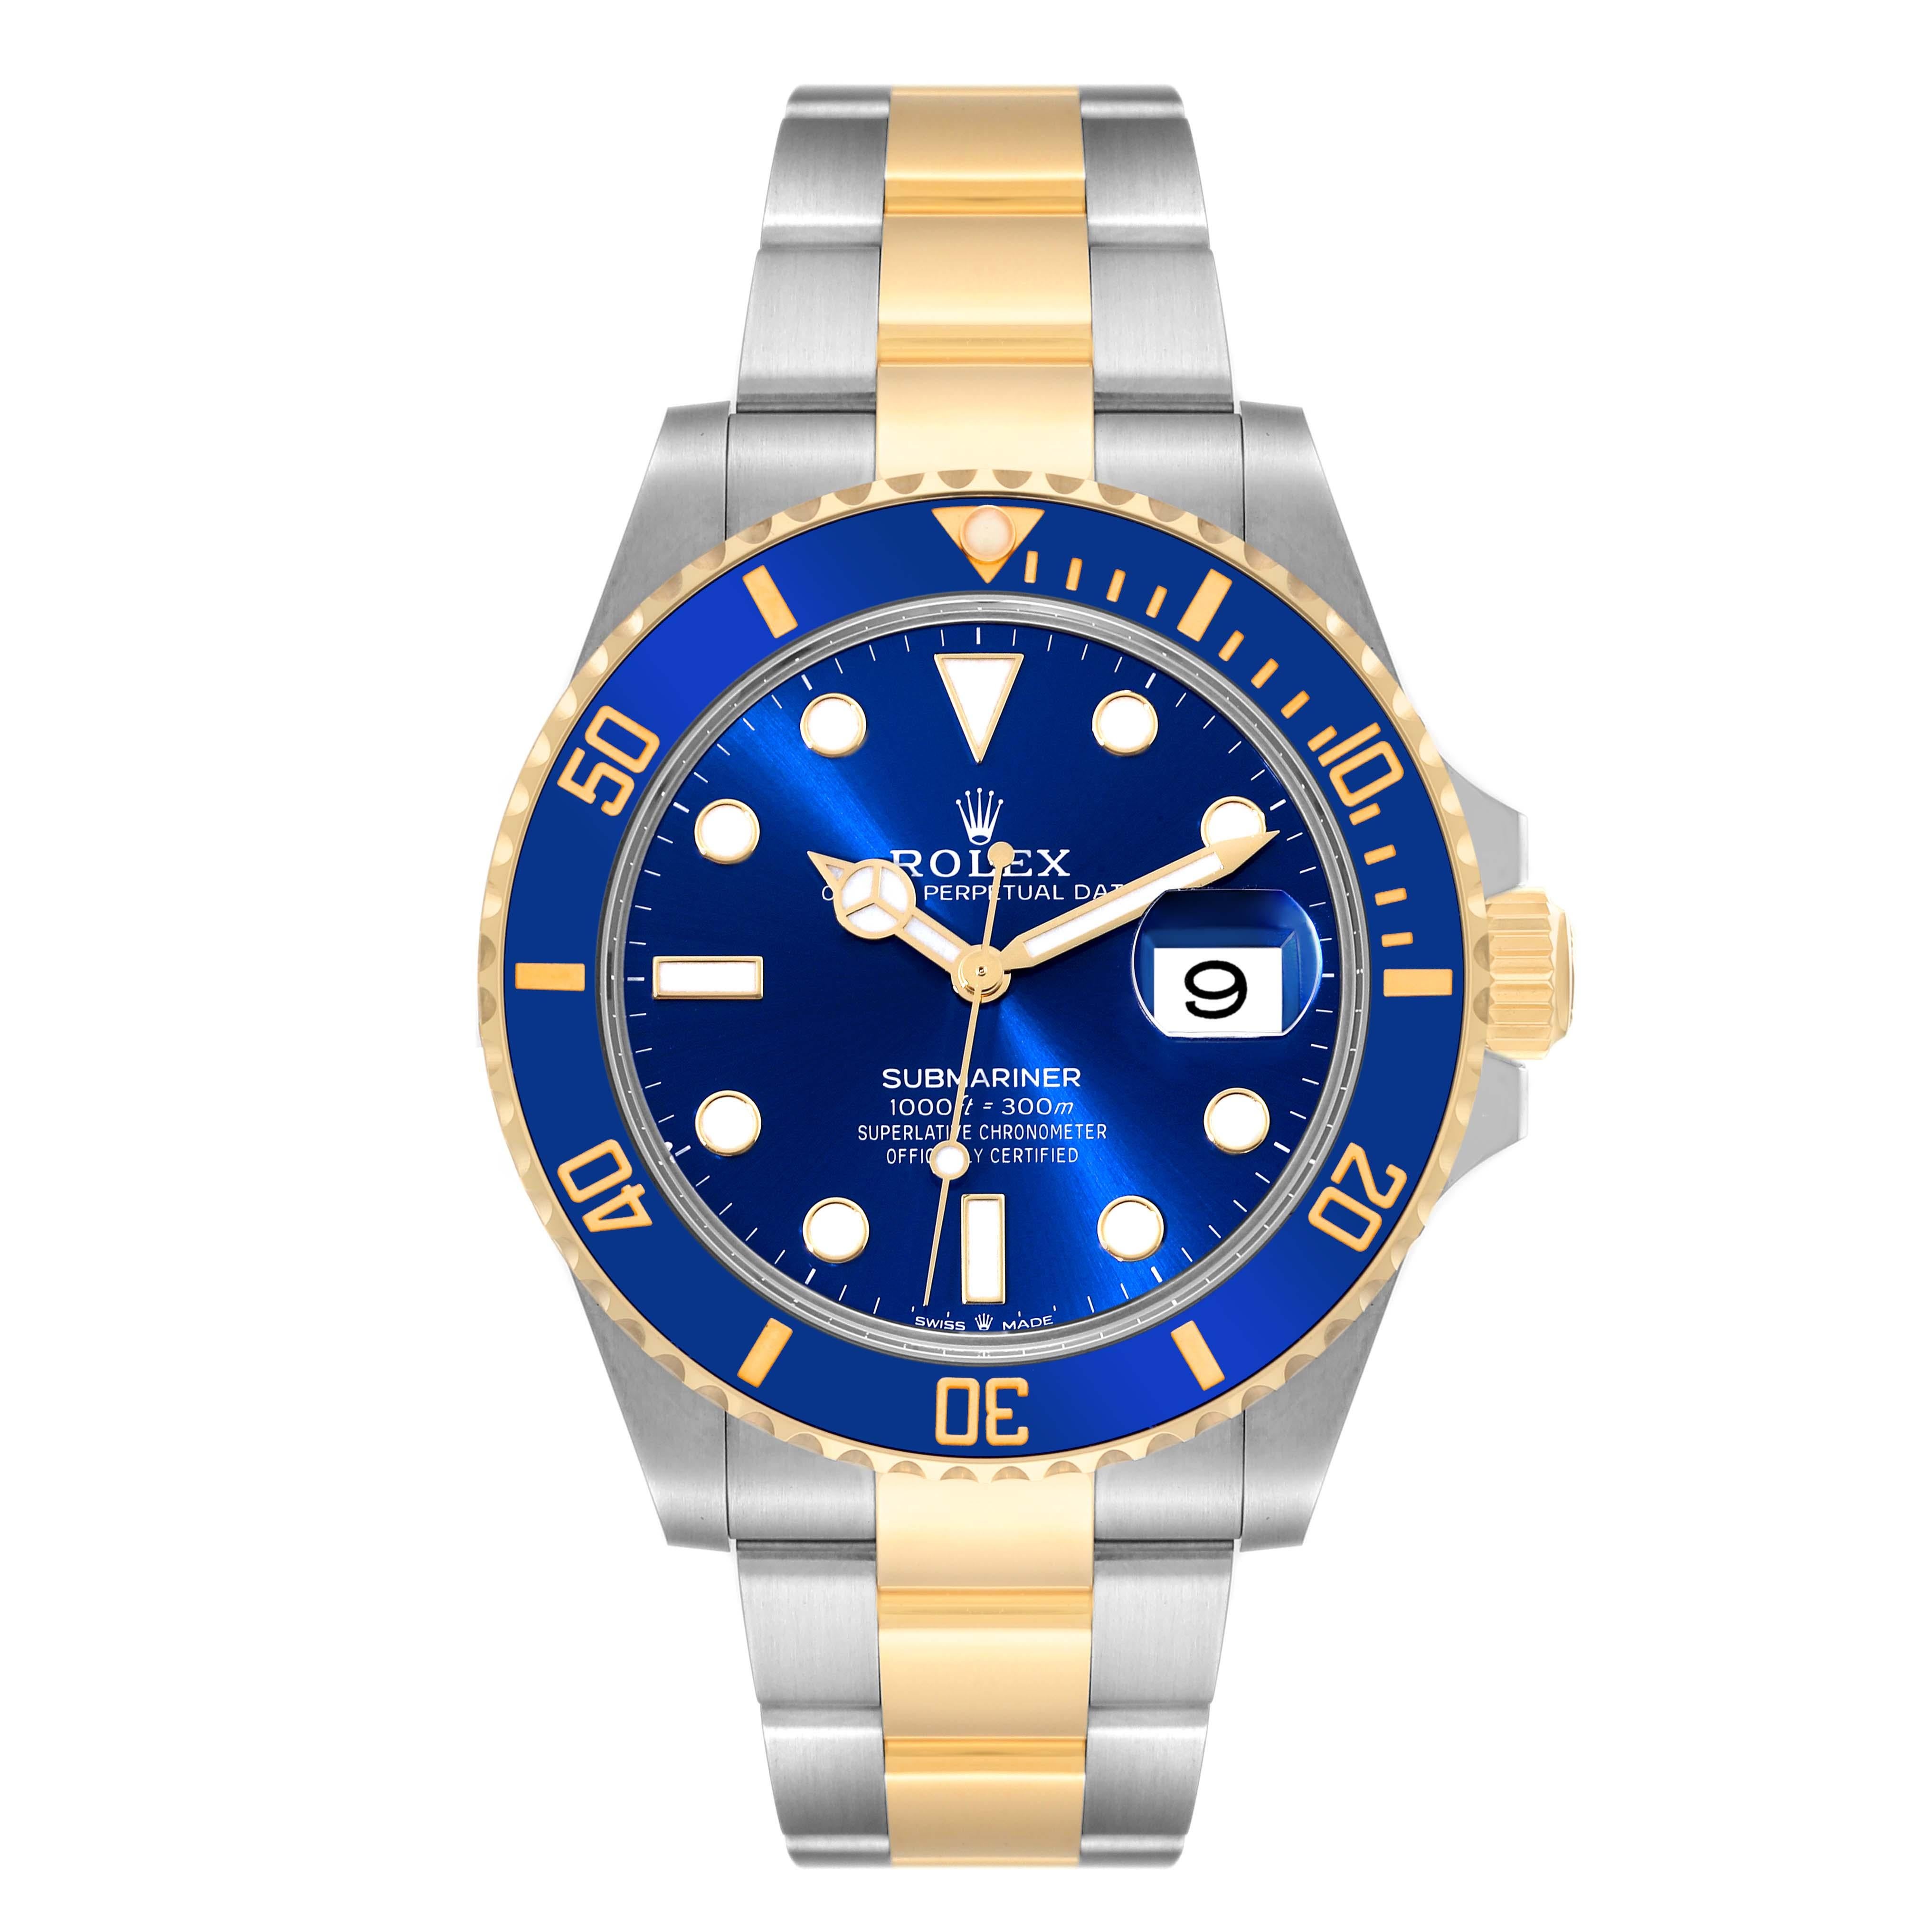 Rolex Submariner 41 Steel Yellow Gold Blue Dial Mens Watch 126613 Unworn. Officially certified chronometer automatic self-winding movement. Stainless steel and 18k yellow gold case 41 mm in diameter. Rolex logo on the crown. Ceramic blue Ion-plated